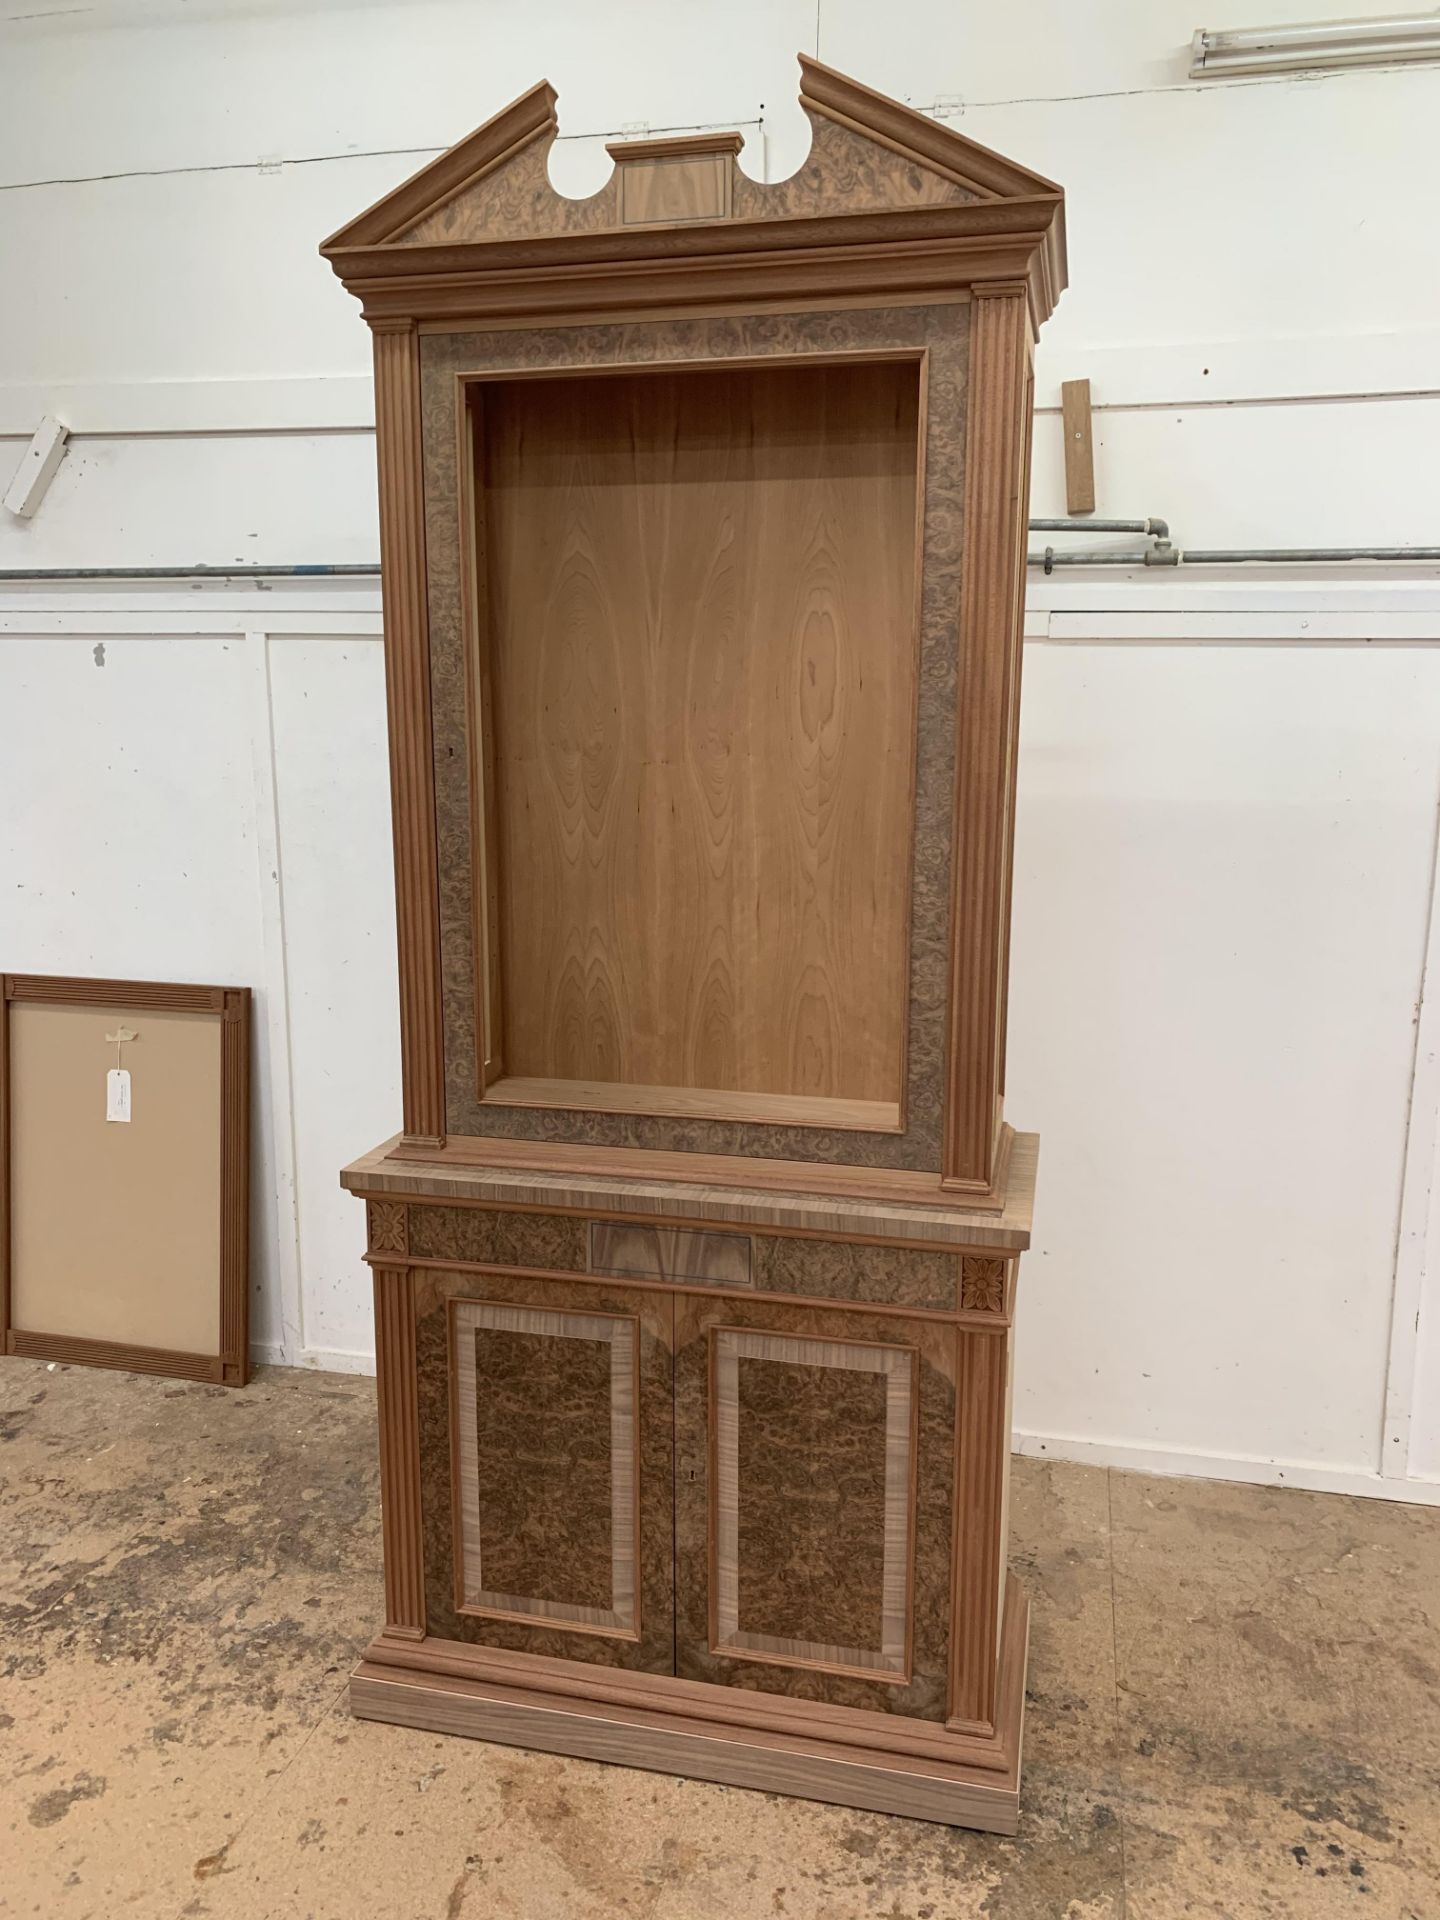 Two-door tall Bookcase, in walnut finish, from the Corinthian range, requires finishing/polishing.